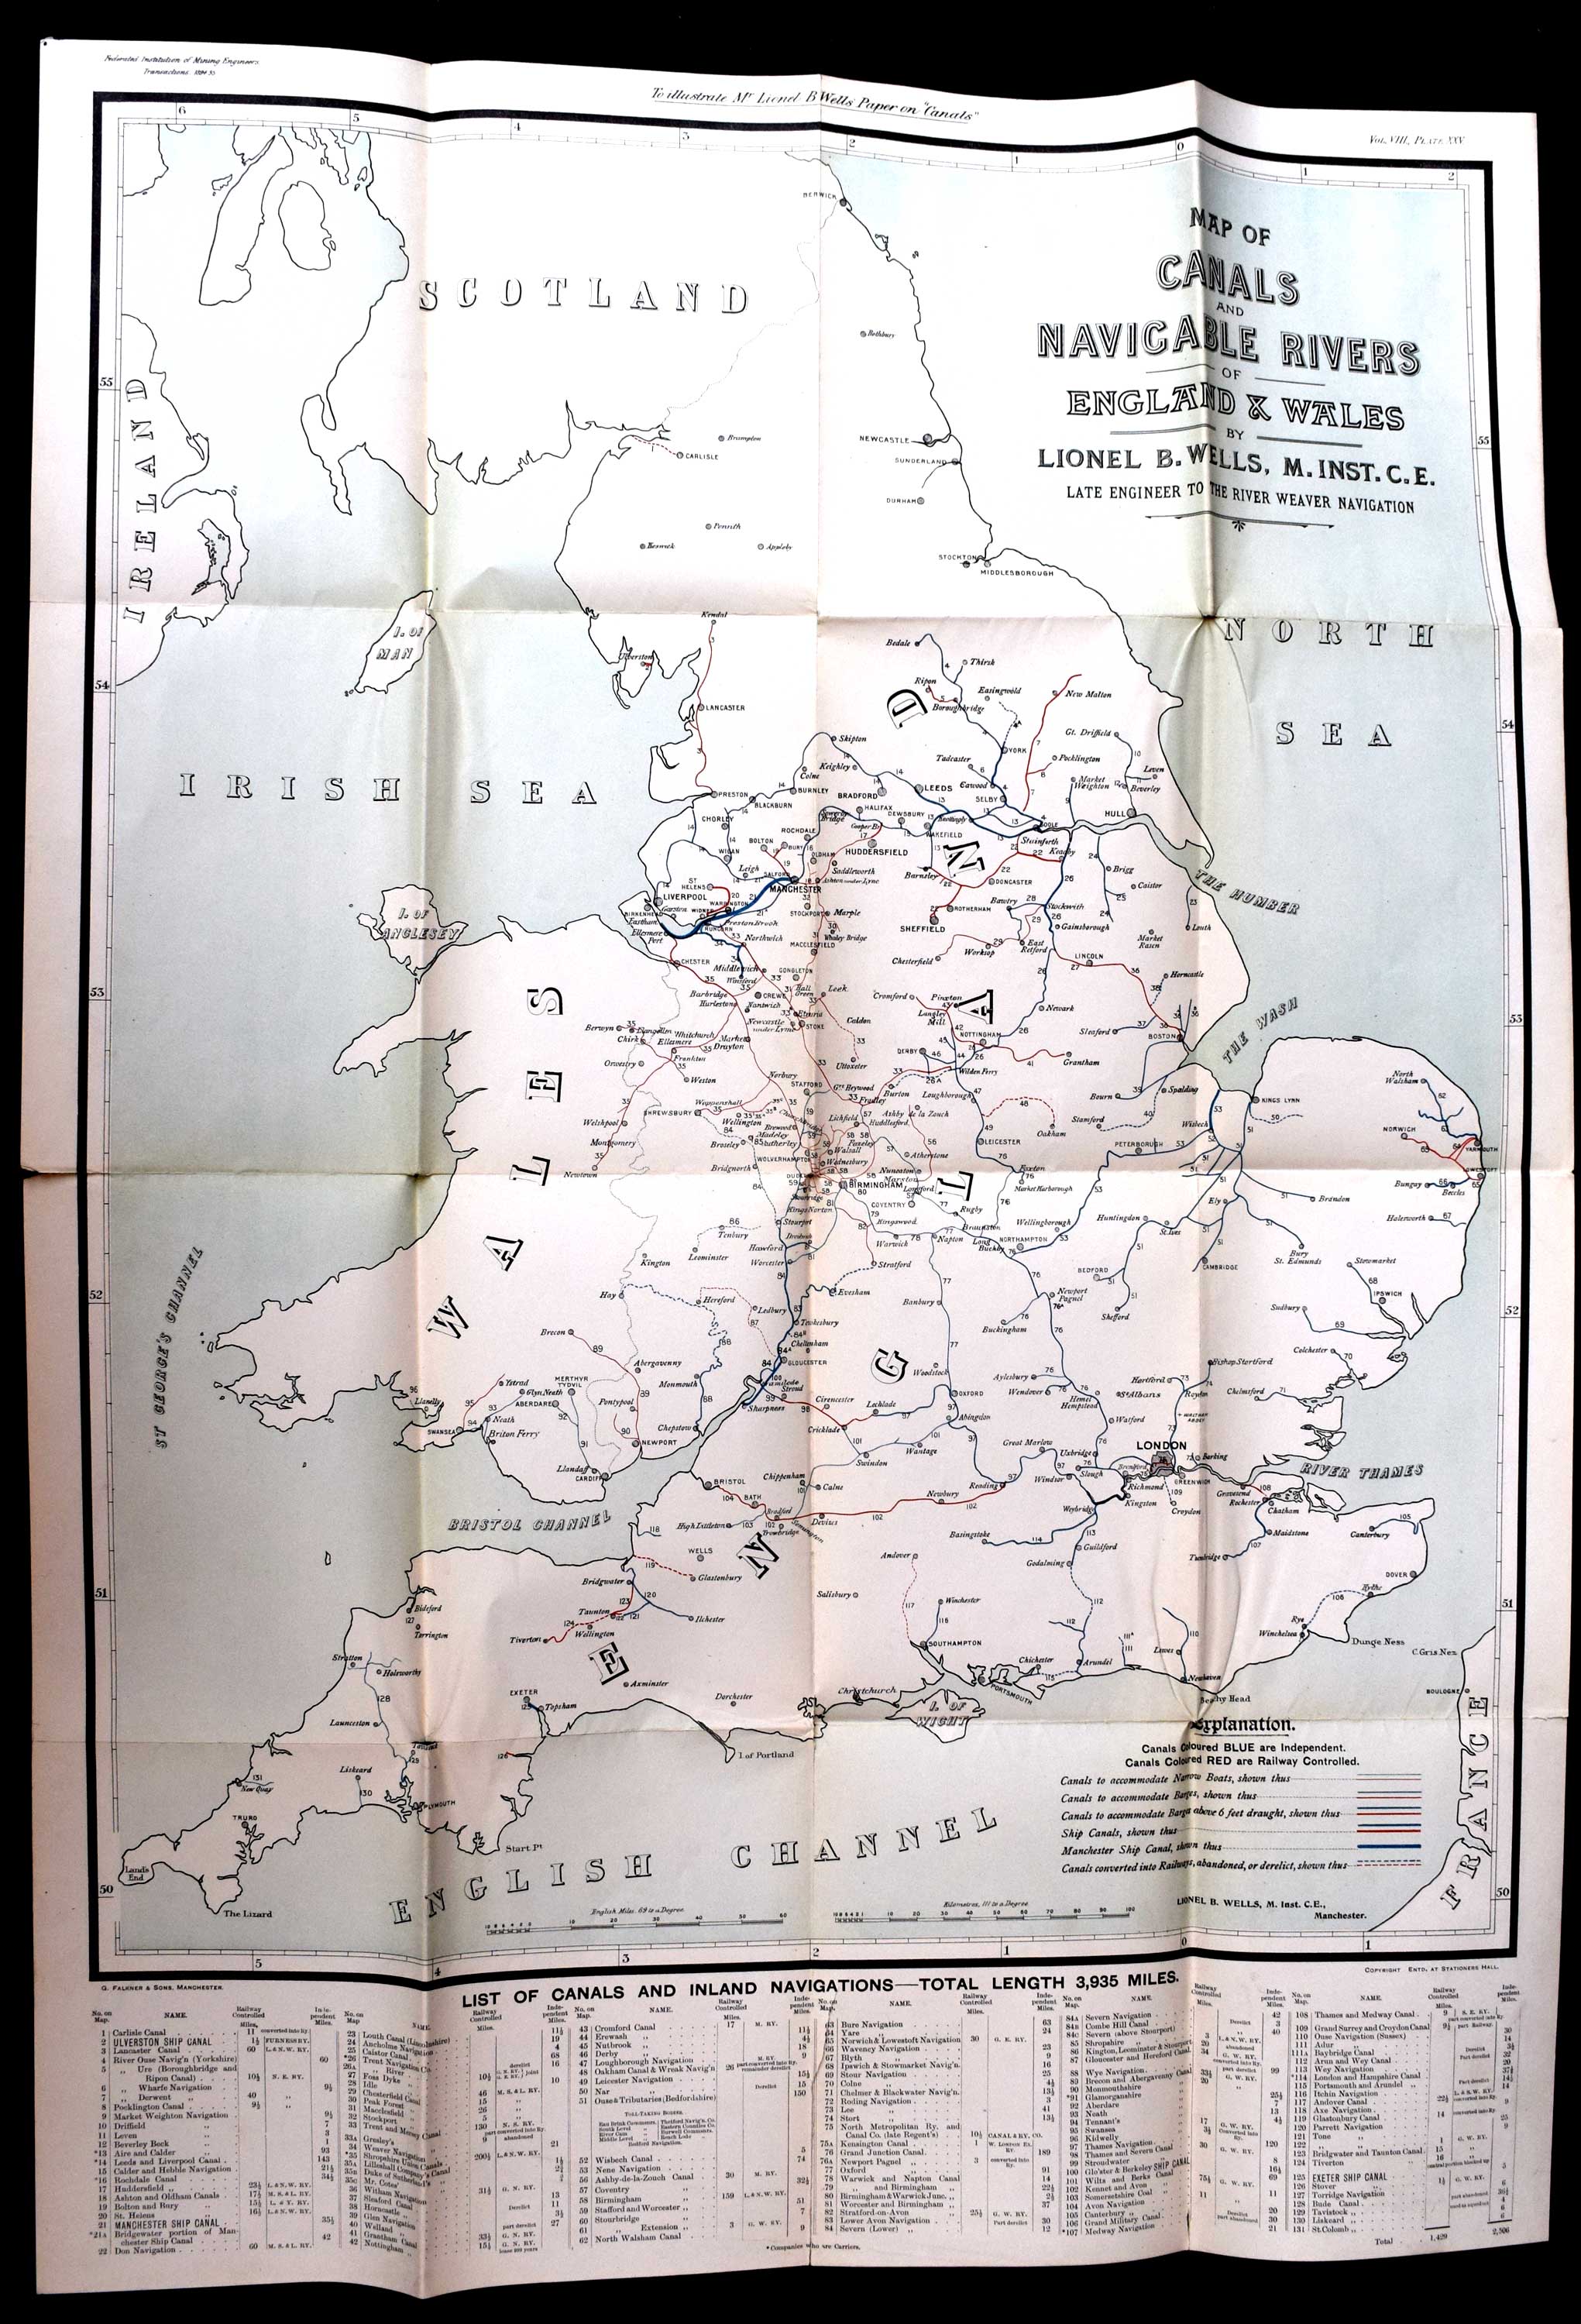 Map of Canals and Navigable Rivers of England and Wales. 1894.